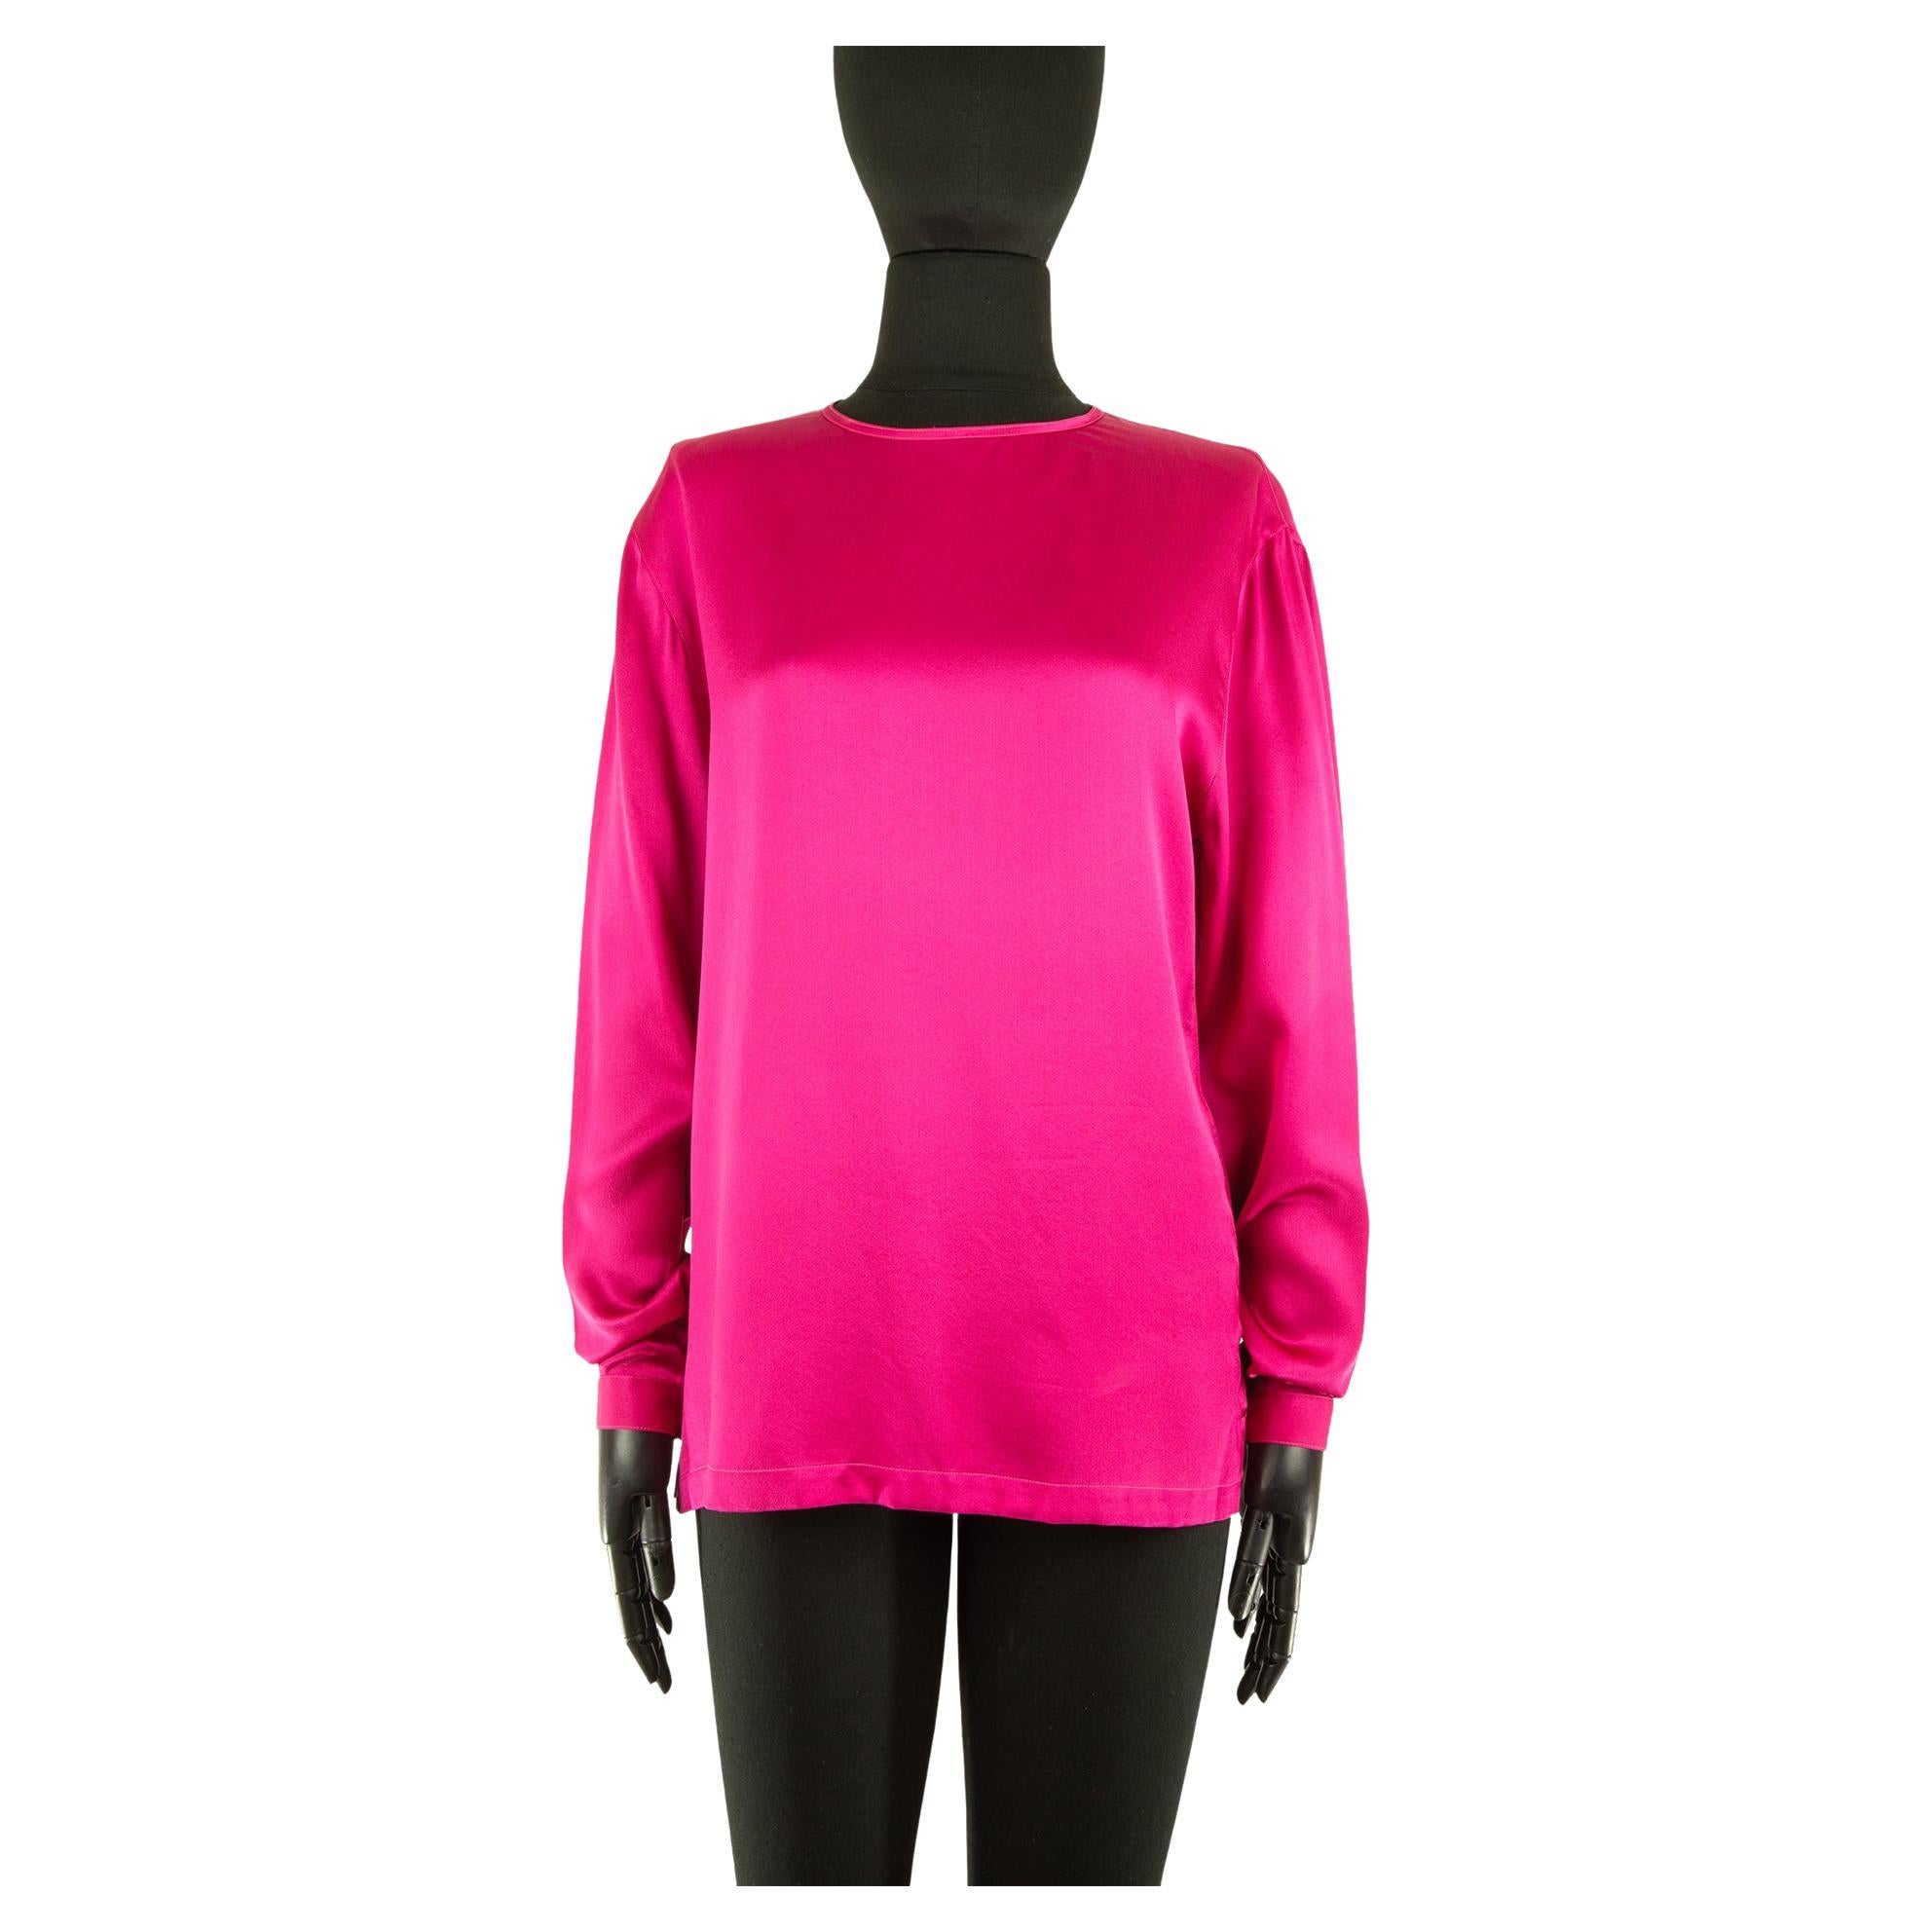 Chanel Hot Pink Satin Top